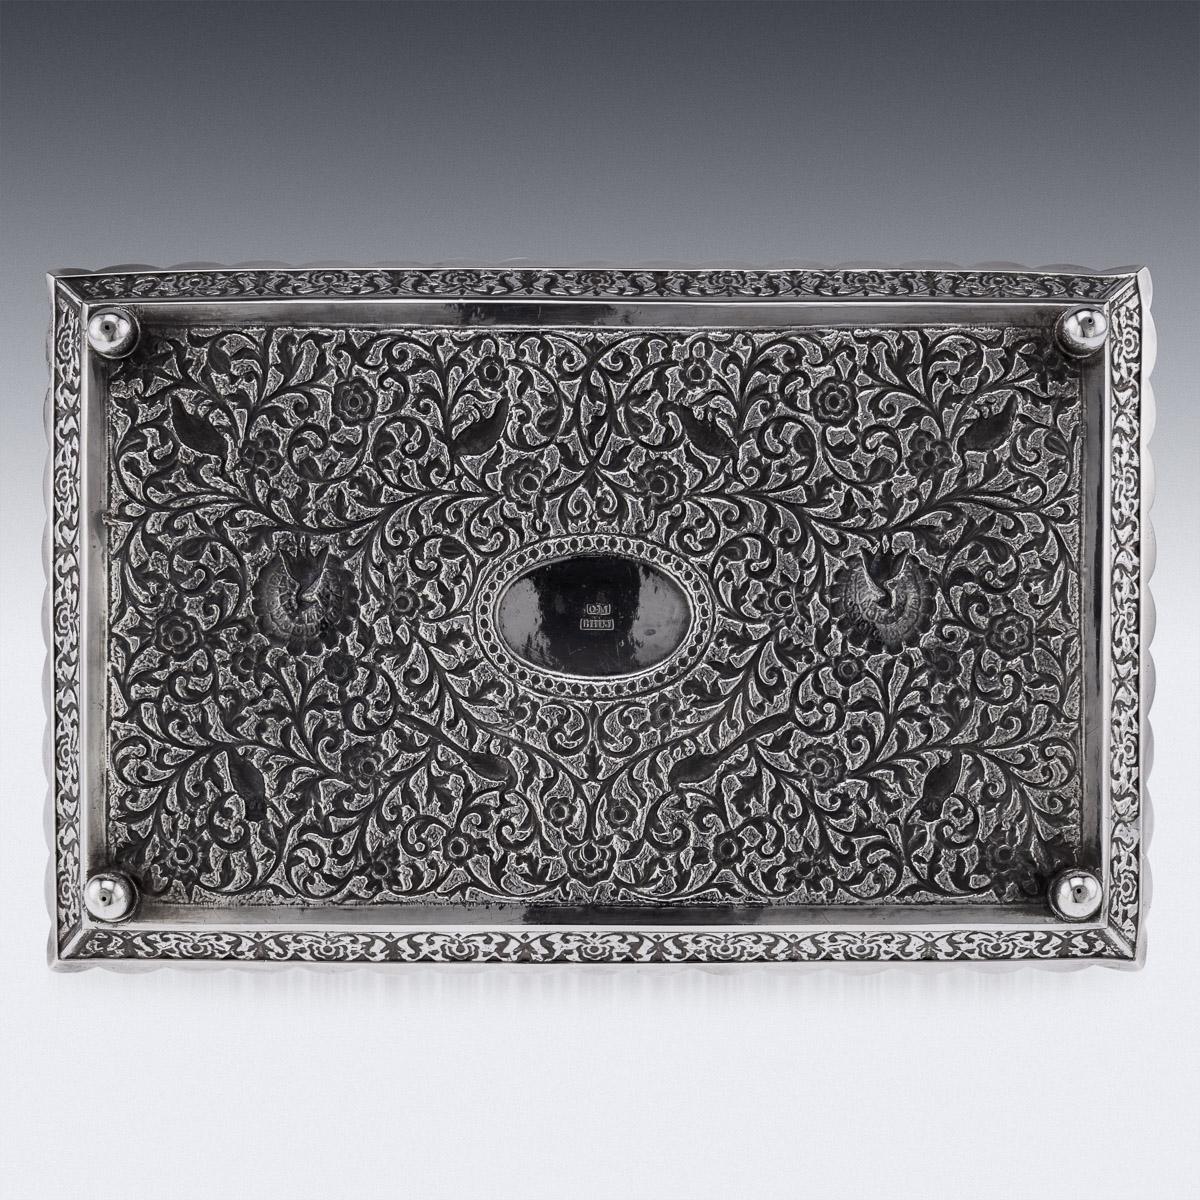 19th Century Indian Kutch (Cutch), Bhuj, (Gujarat region) hand-crafted solid silver tray, of shaped rectangular form, finely chased throughout with scrolling leaves and floral patterns on a finely tooled matted ground, the tray resting on four ball